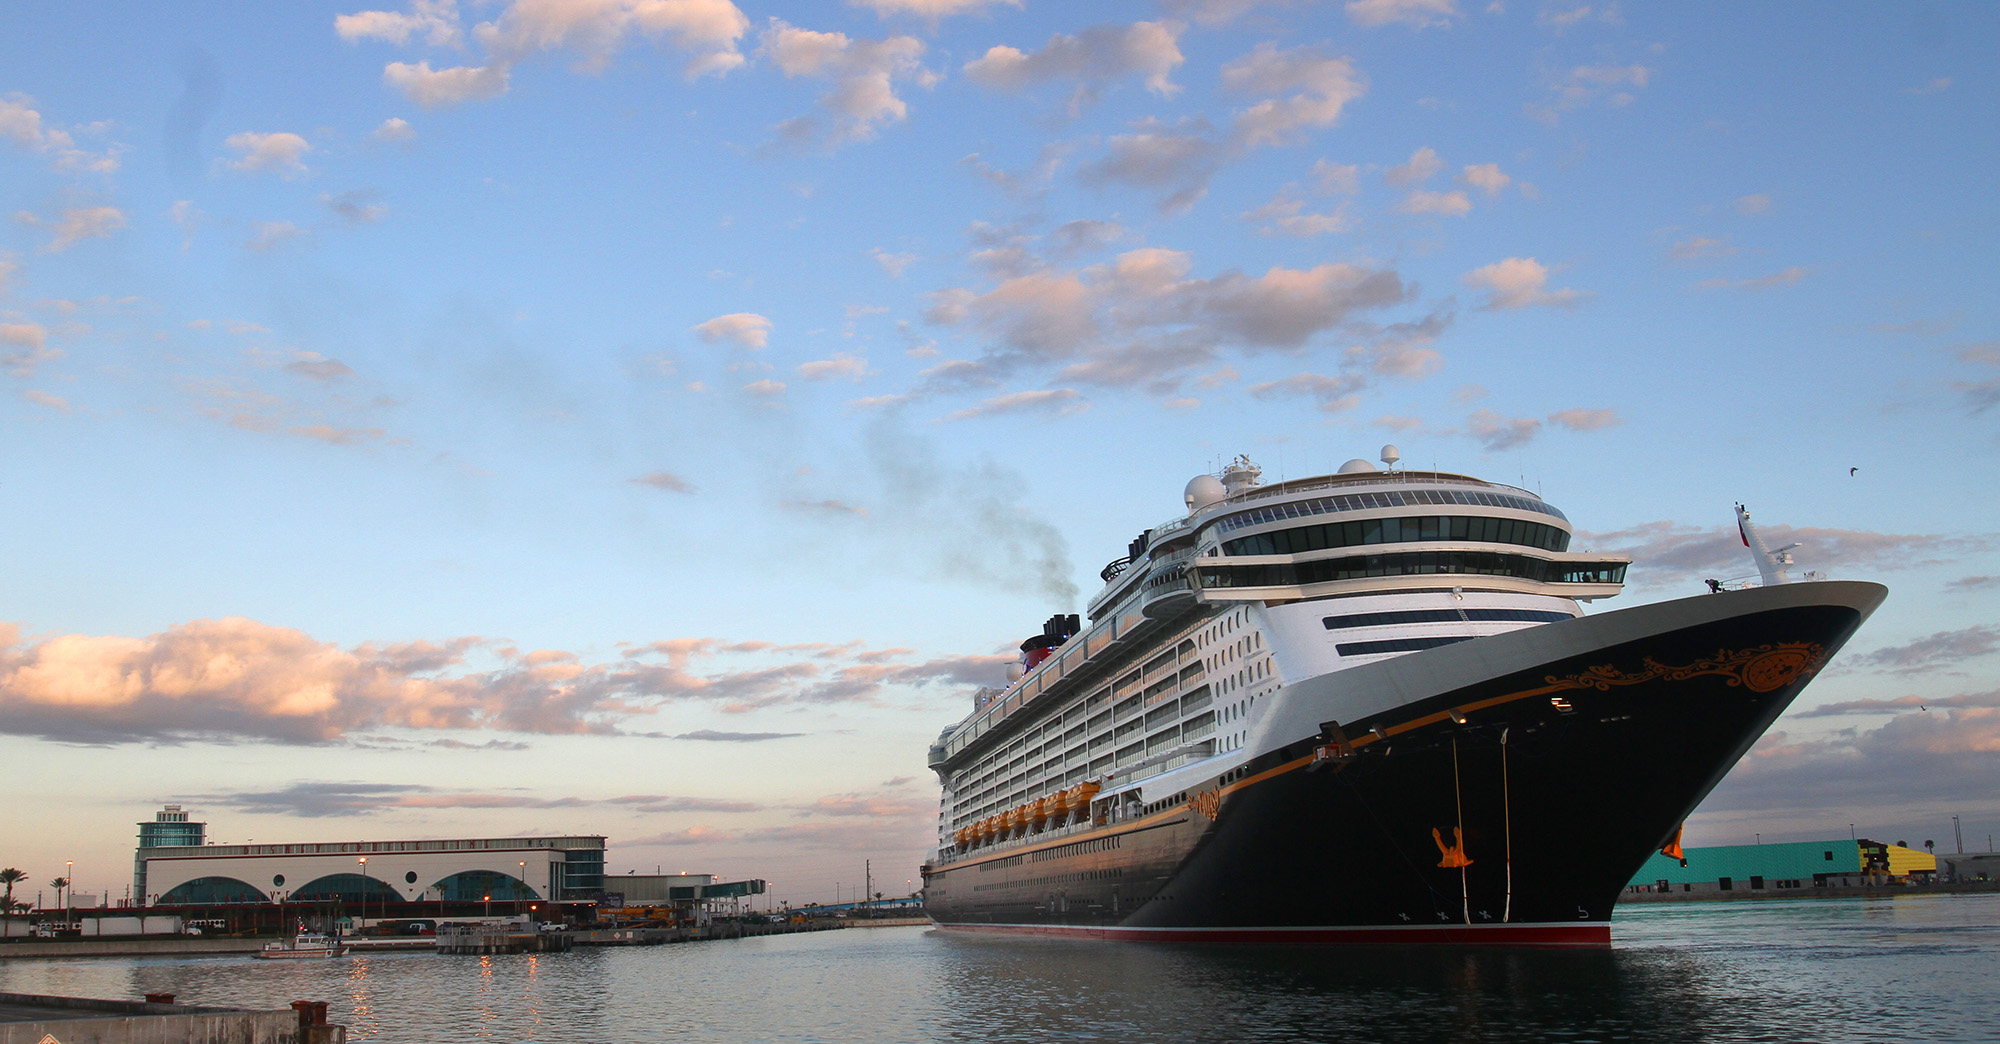 Parents Sue Disney Cruise Line for $20M Over Alleged Sexual Assault of 3-Year-Old Daughter